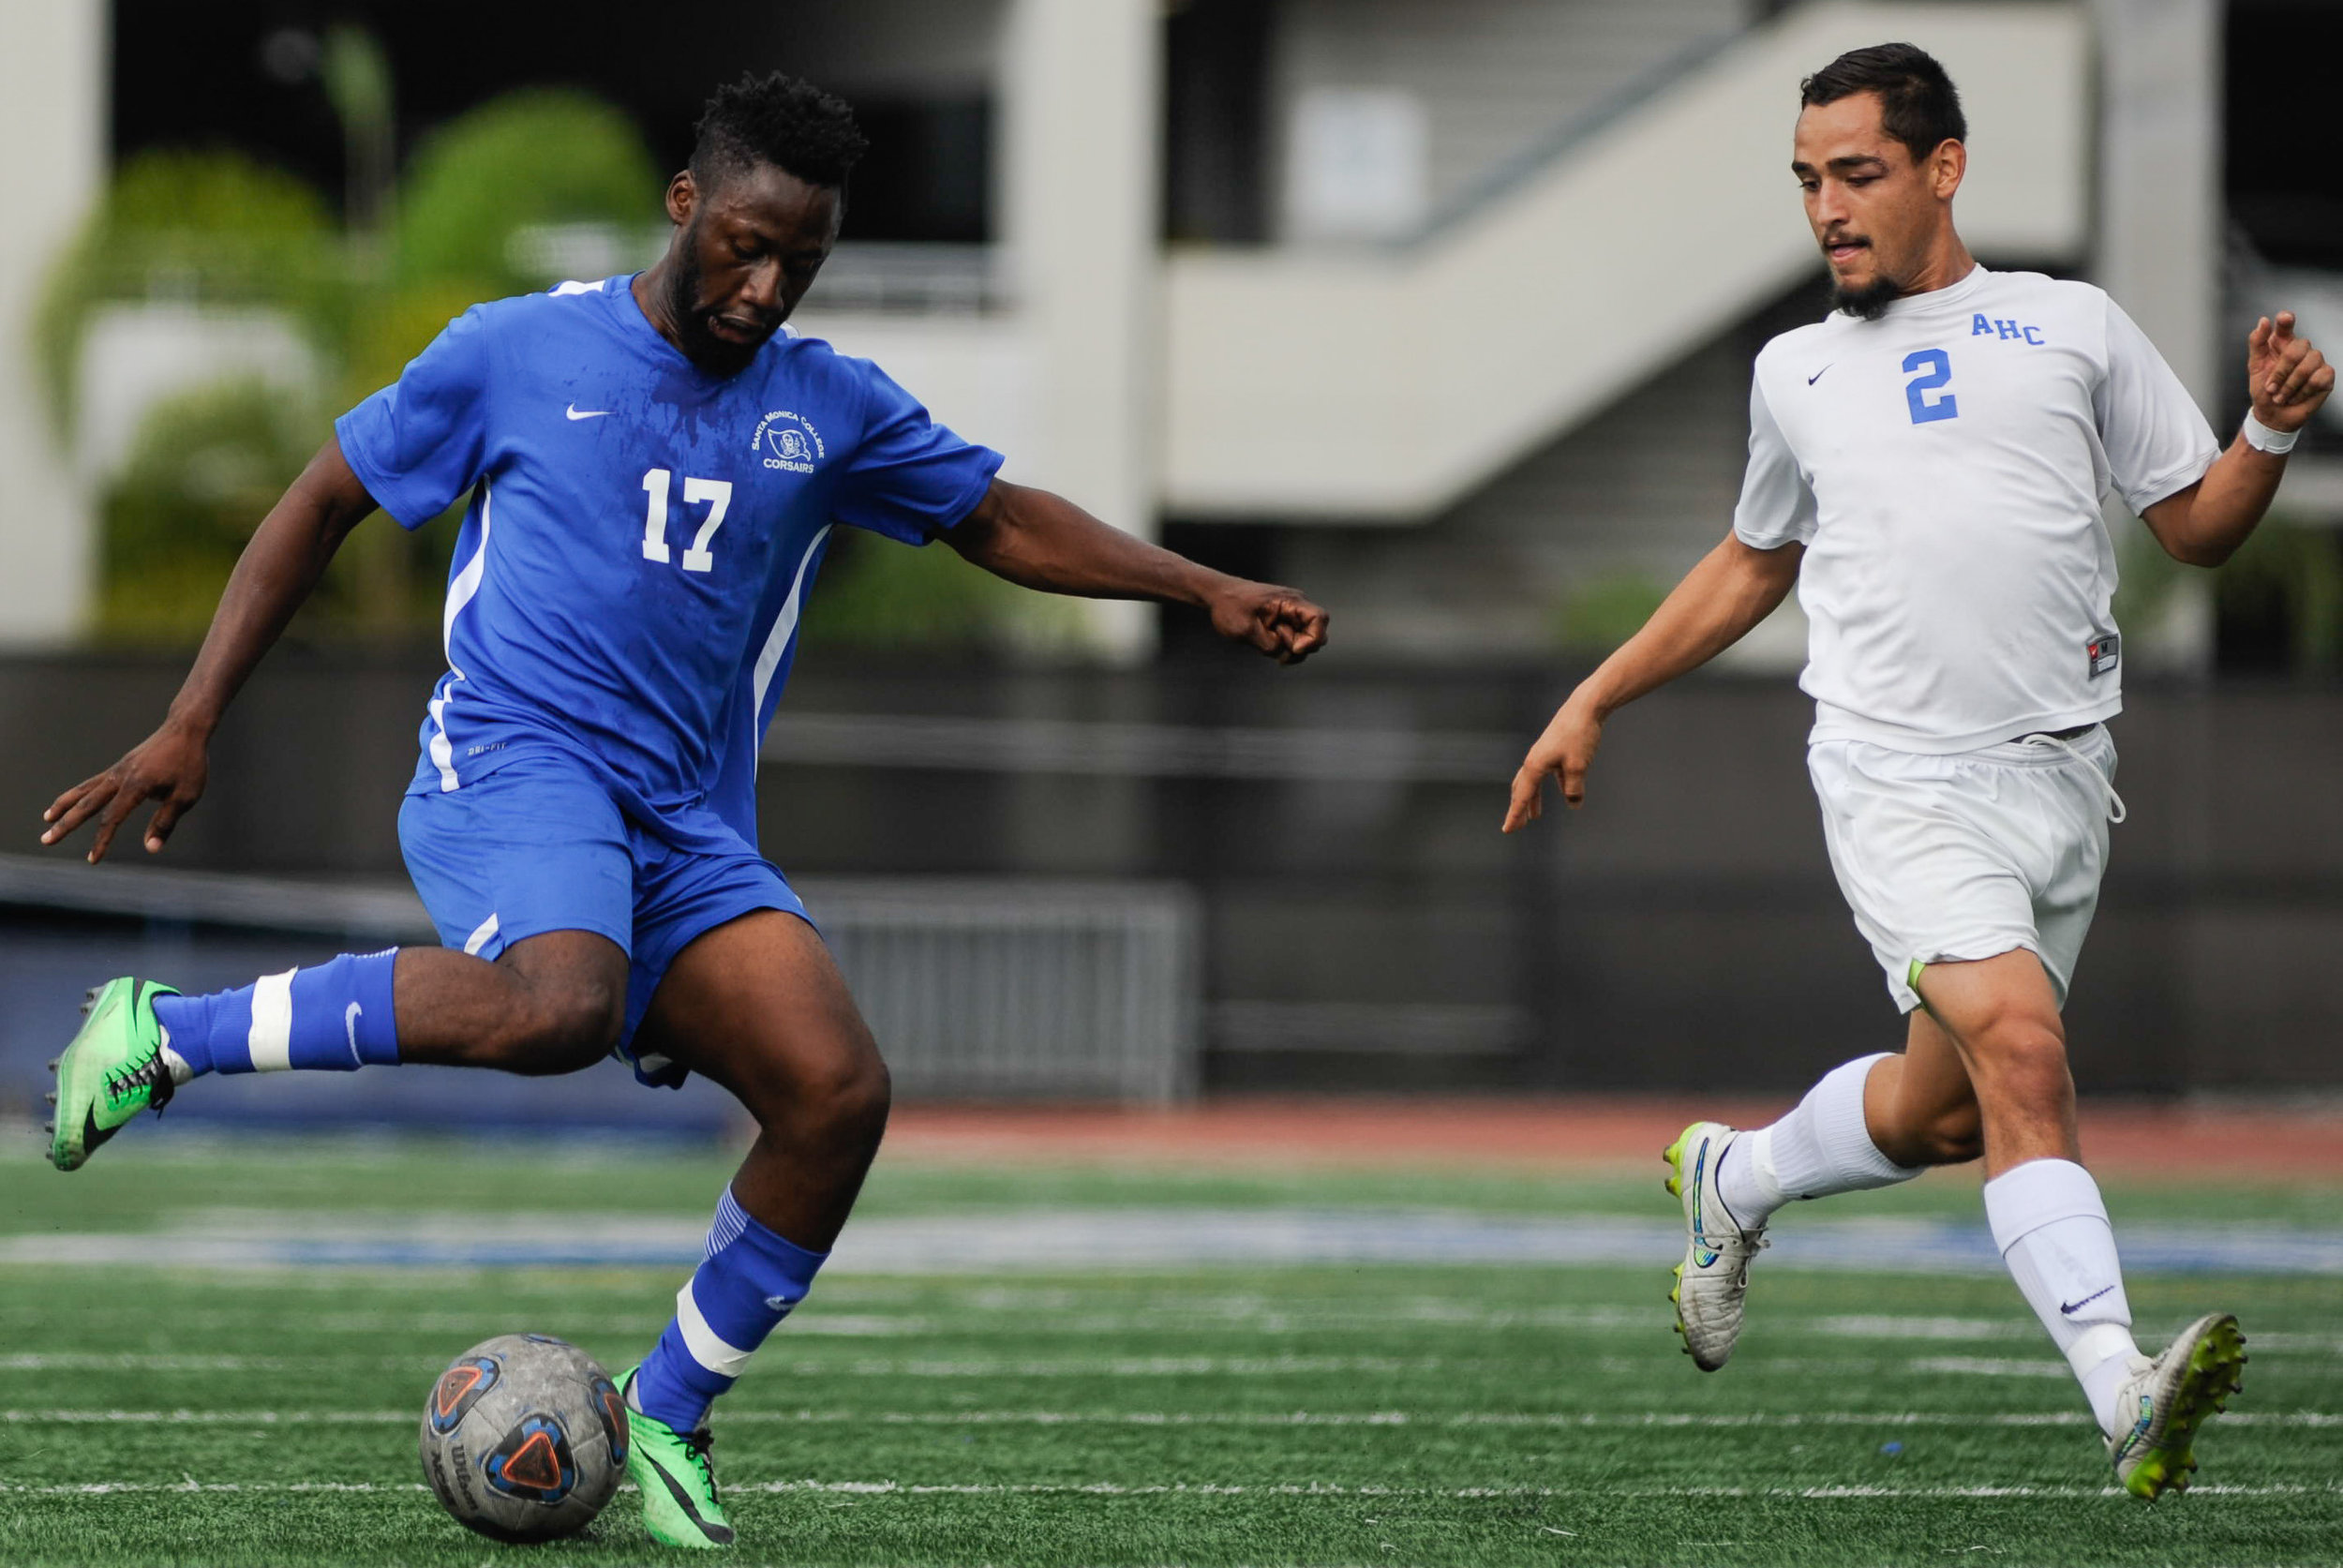  Midfielder Cyrille Njomo (17) of Santa Monica College fakes a pass while being guarded by defender Mario Delgado (2) of Allan Hancock College. The Santa Monica College Corsairs end the game tied with the Allan Hancock College Bulldogs 1-1. The match